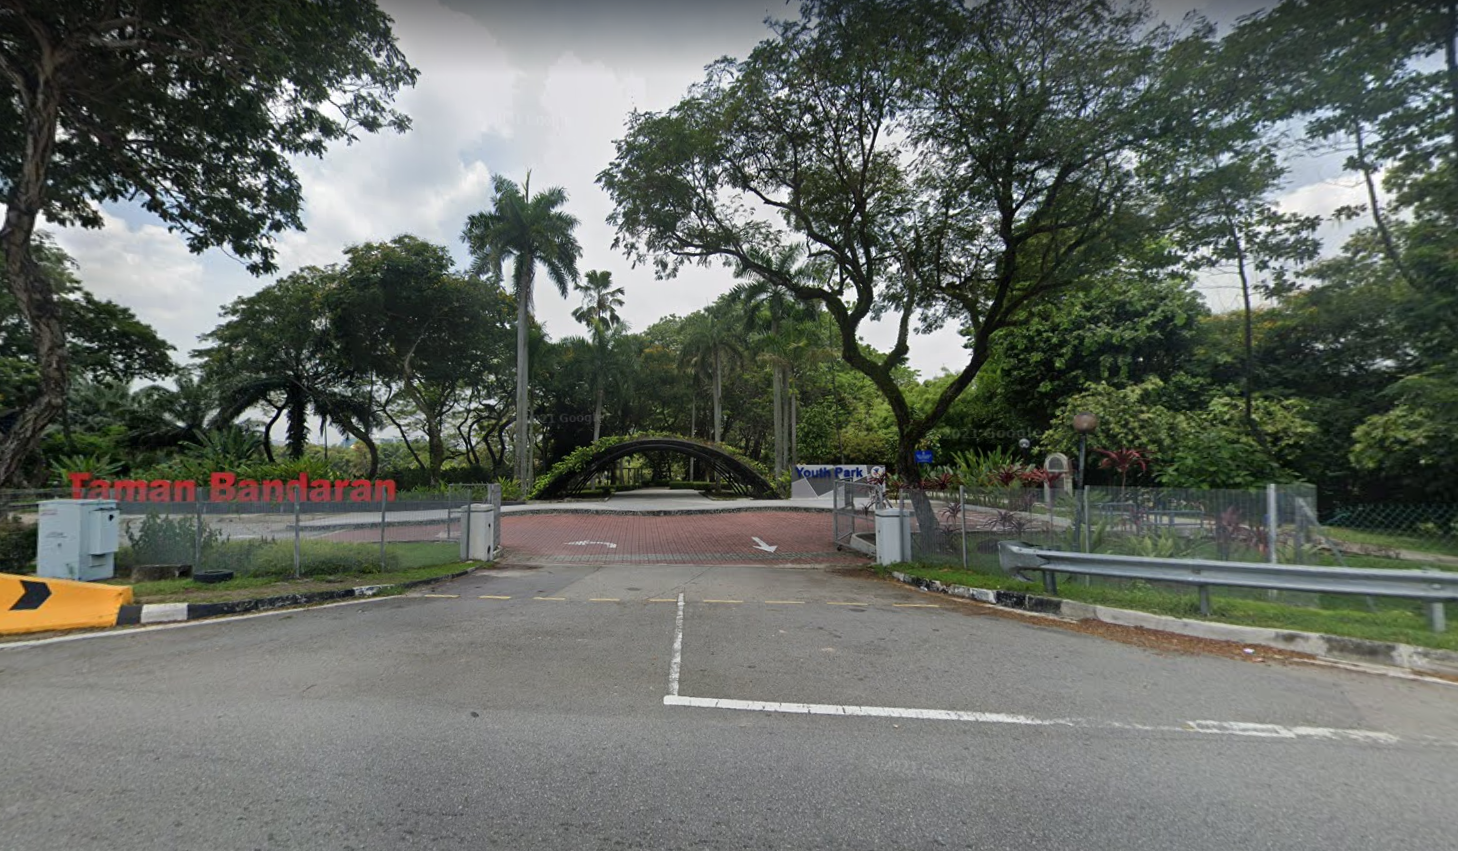 The main entry into the park is located off the LDP highway. Image credit: Google Maps